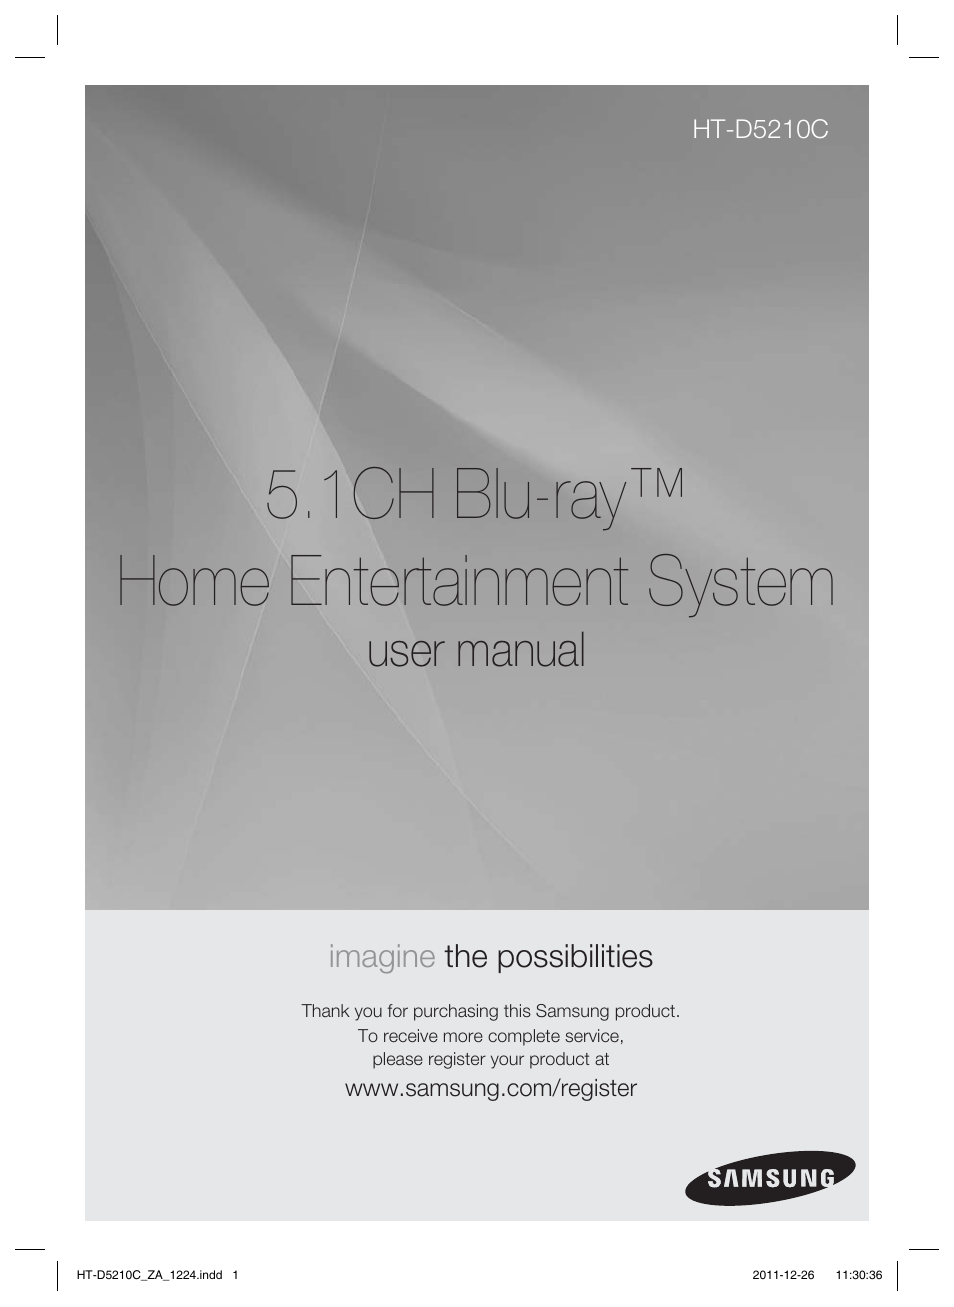 Samsung HT-D5210C-ZA User Manual | 85 pages